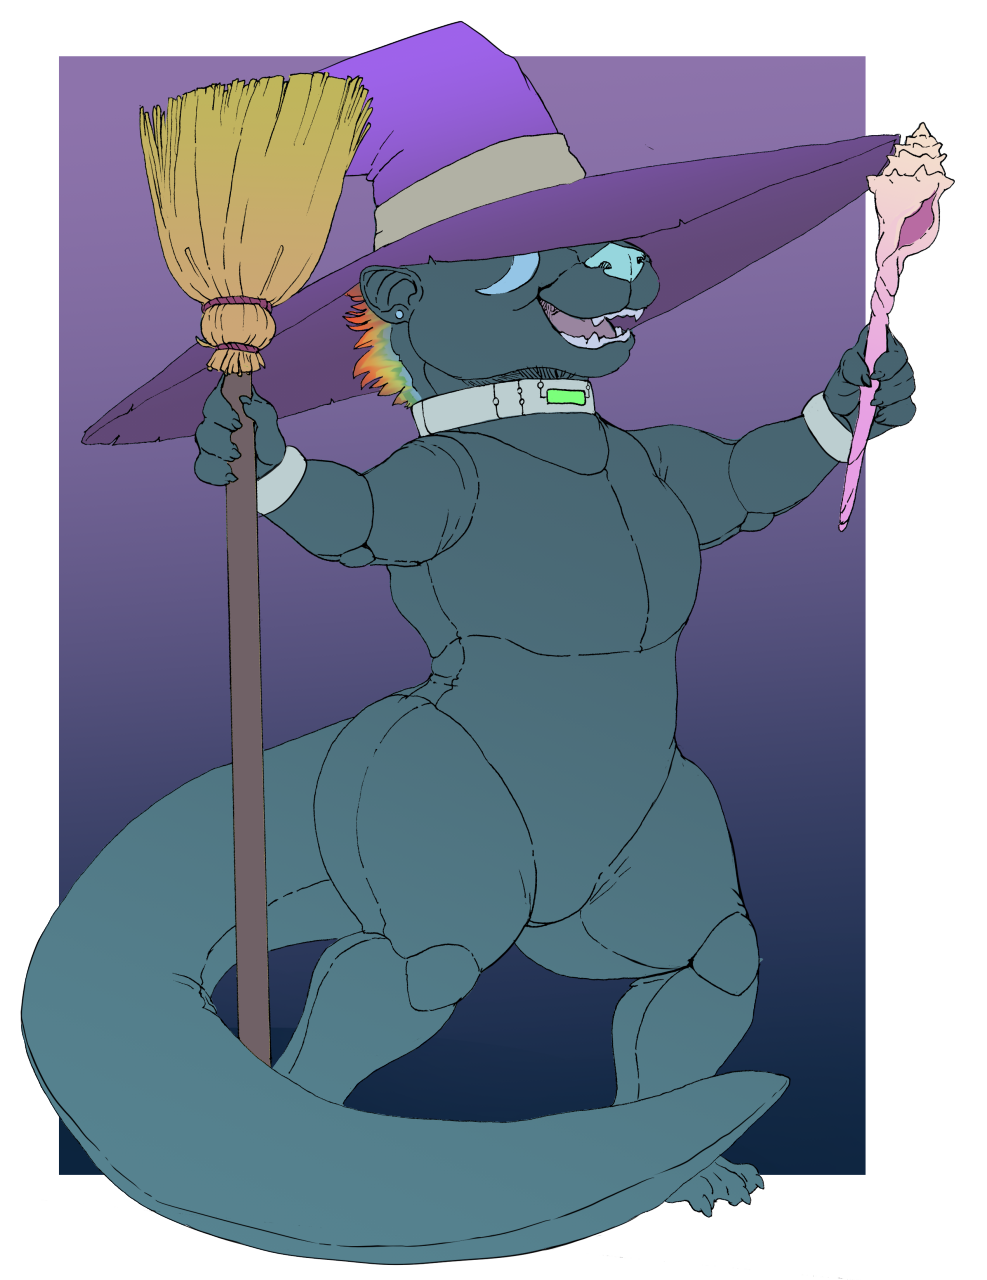 [Commission[-Ottstober's Toy Witch